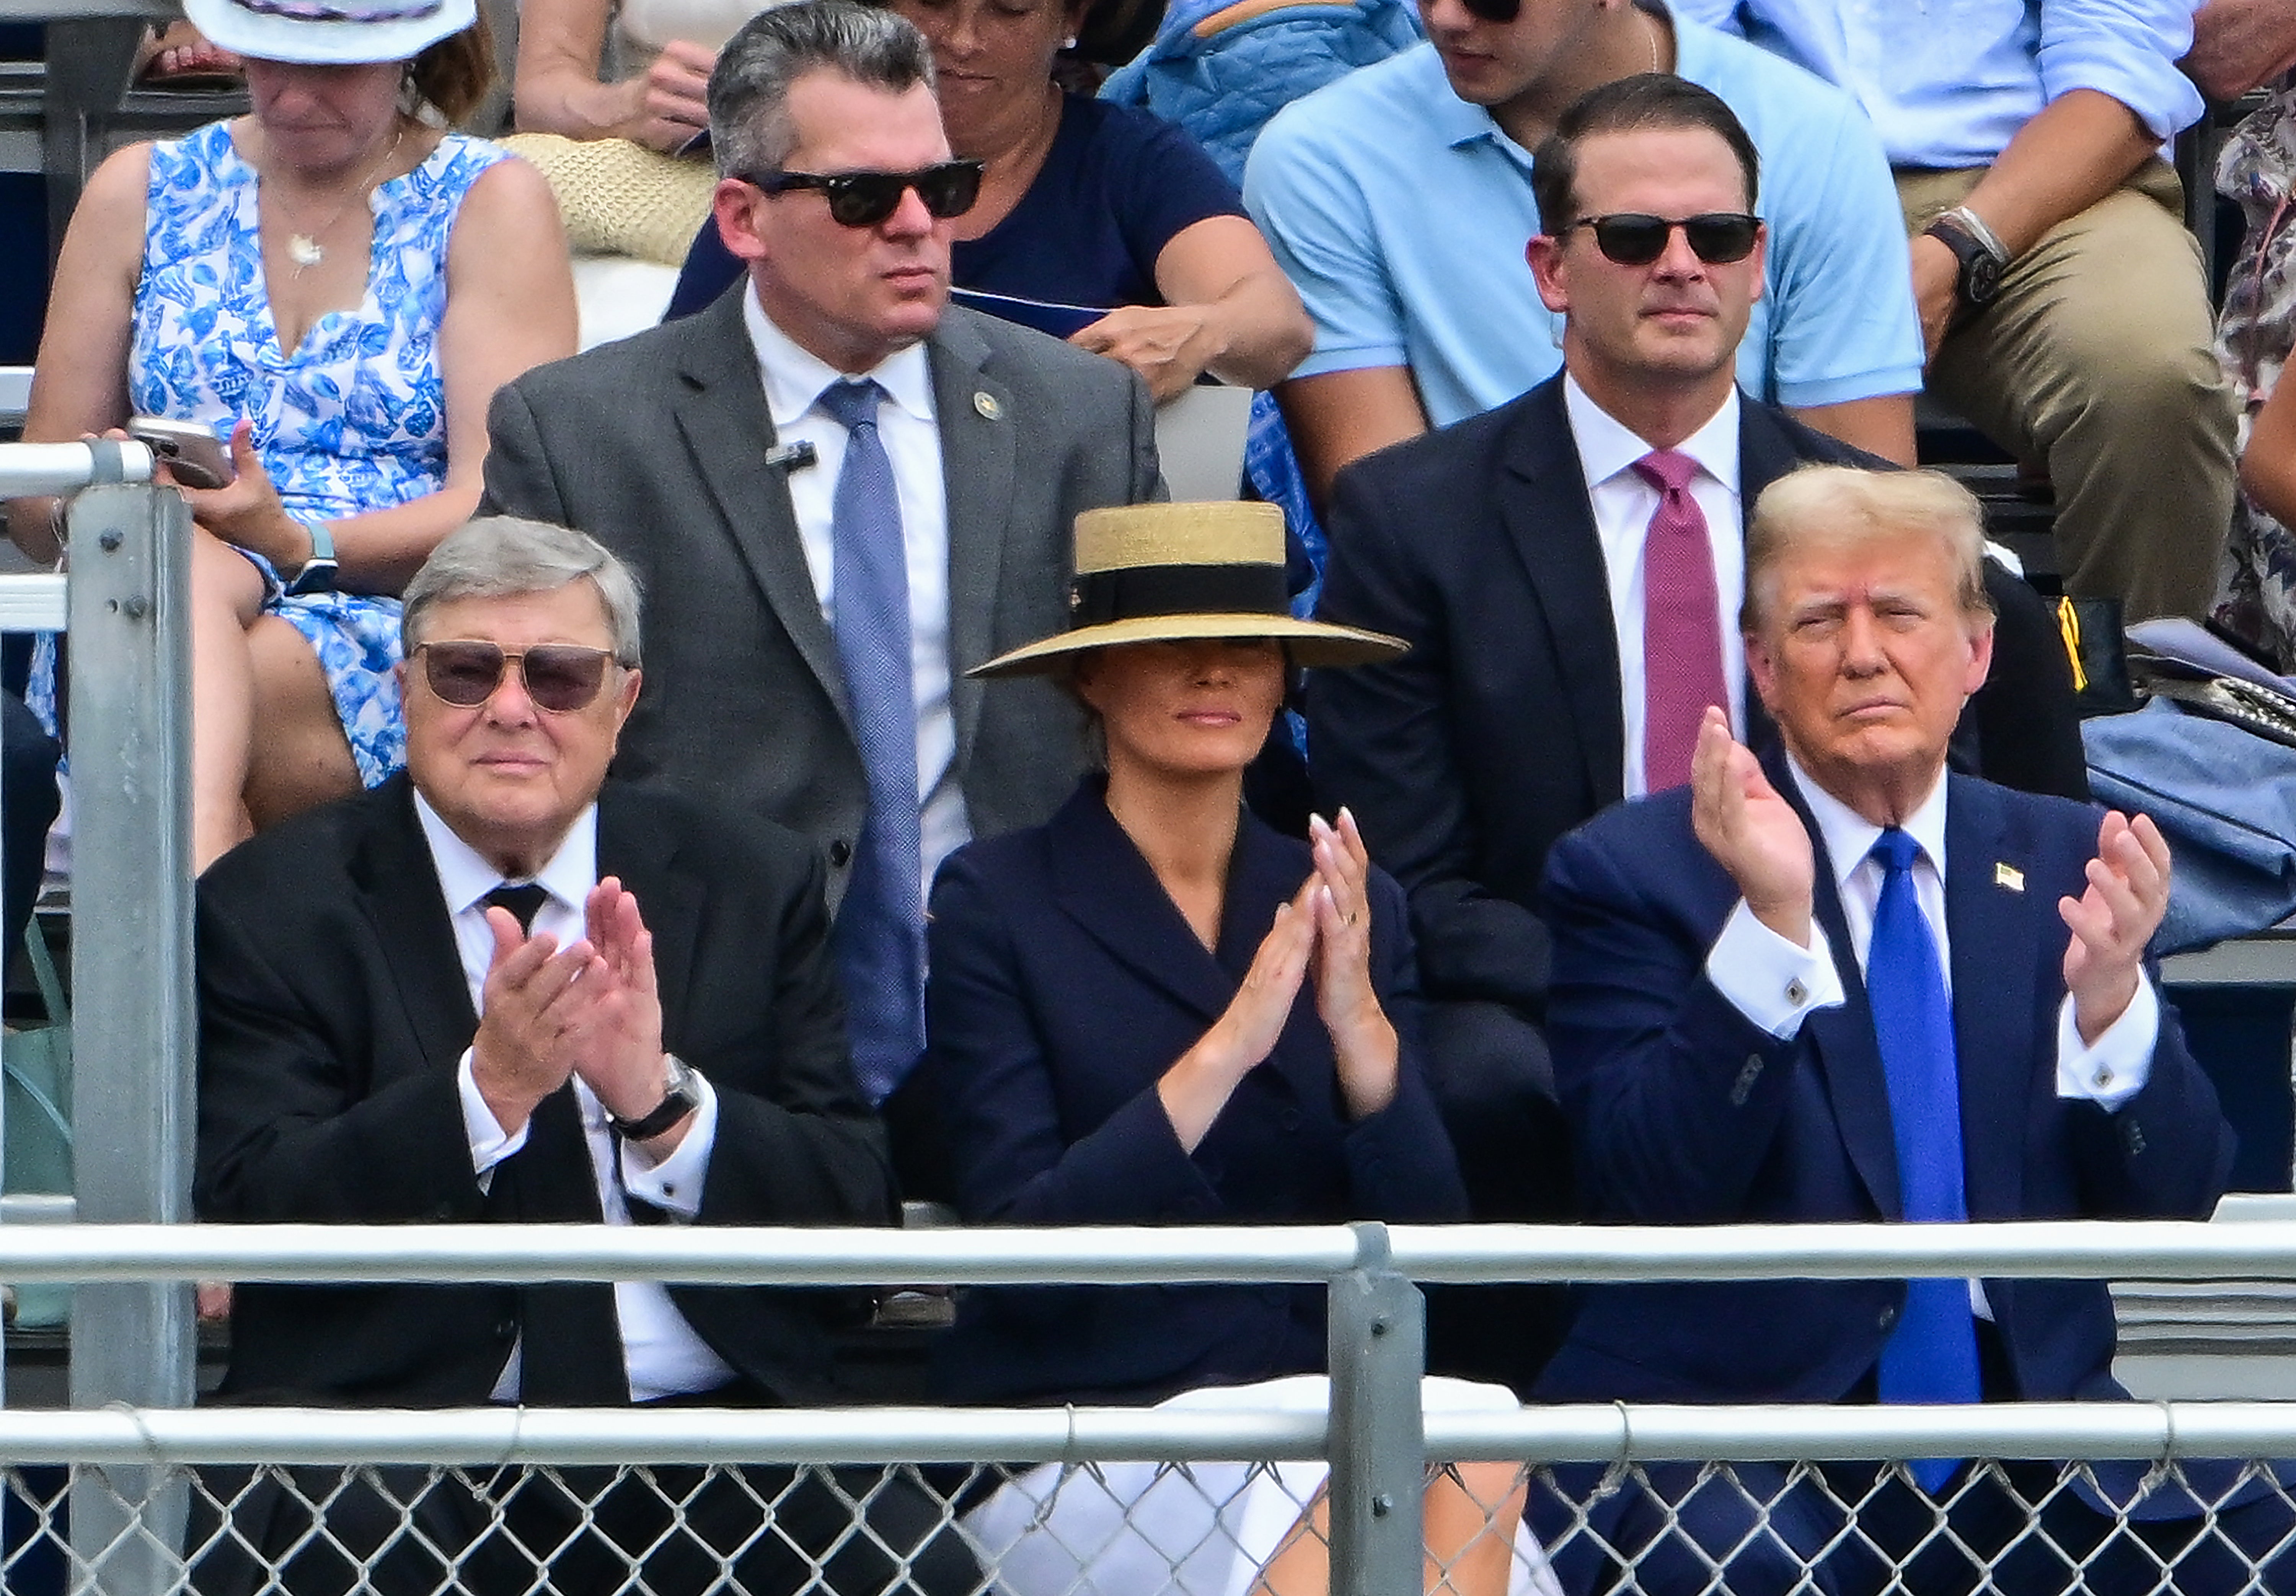 Donald Trump (right), Melania Trump (center) and her father Viktor Knavs (left) attend Barron Trump’s high school graduation. Experts say Melania is distancing herself from her husband